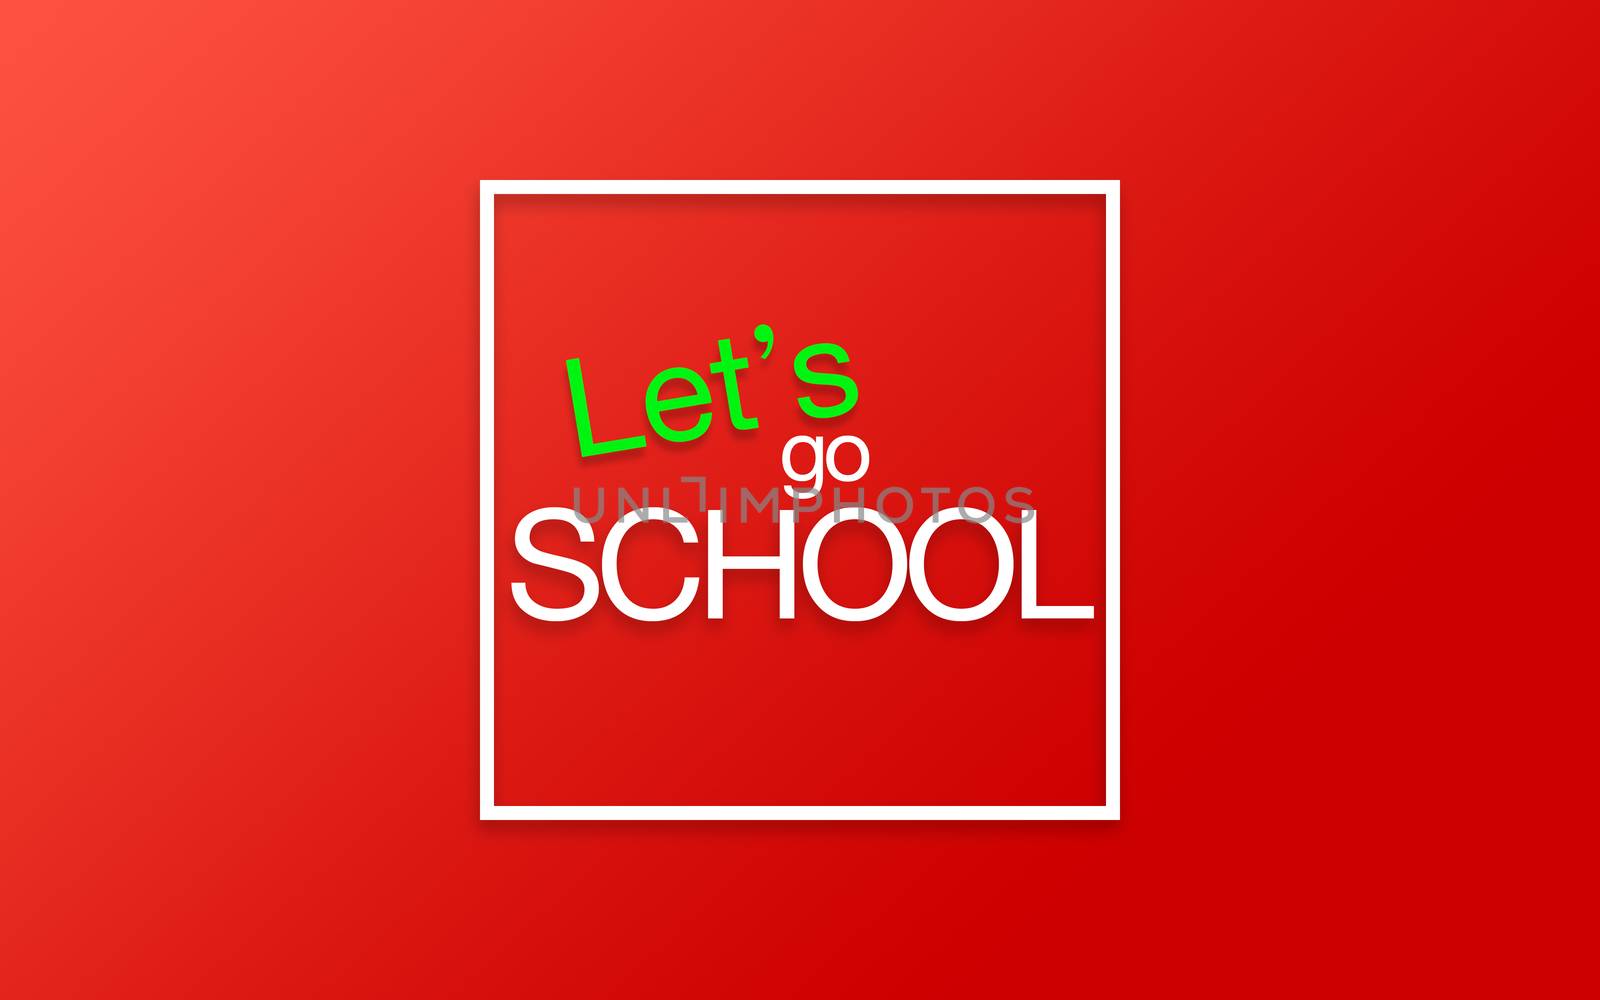 let's go school red background.